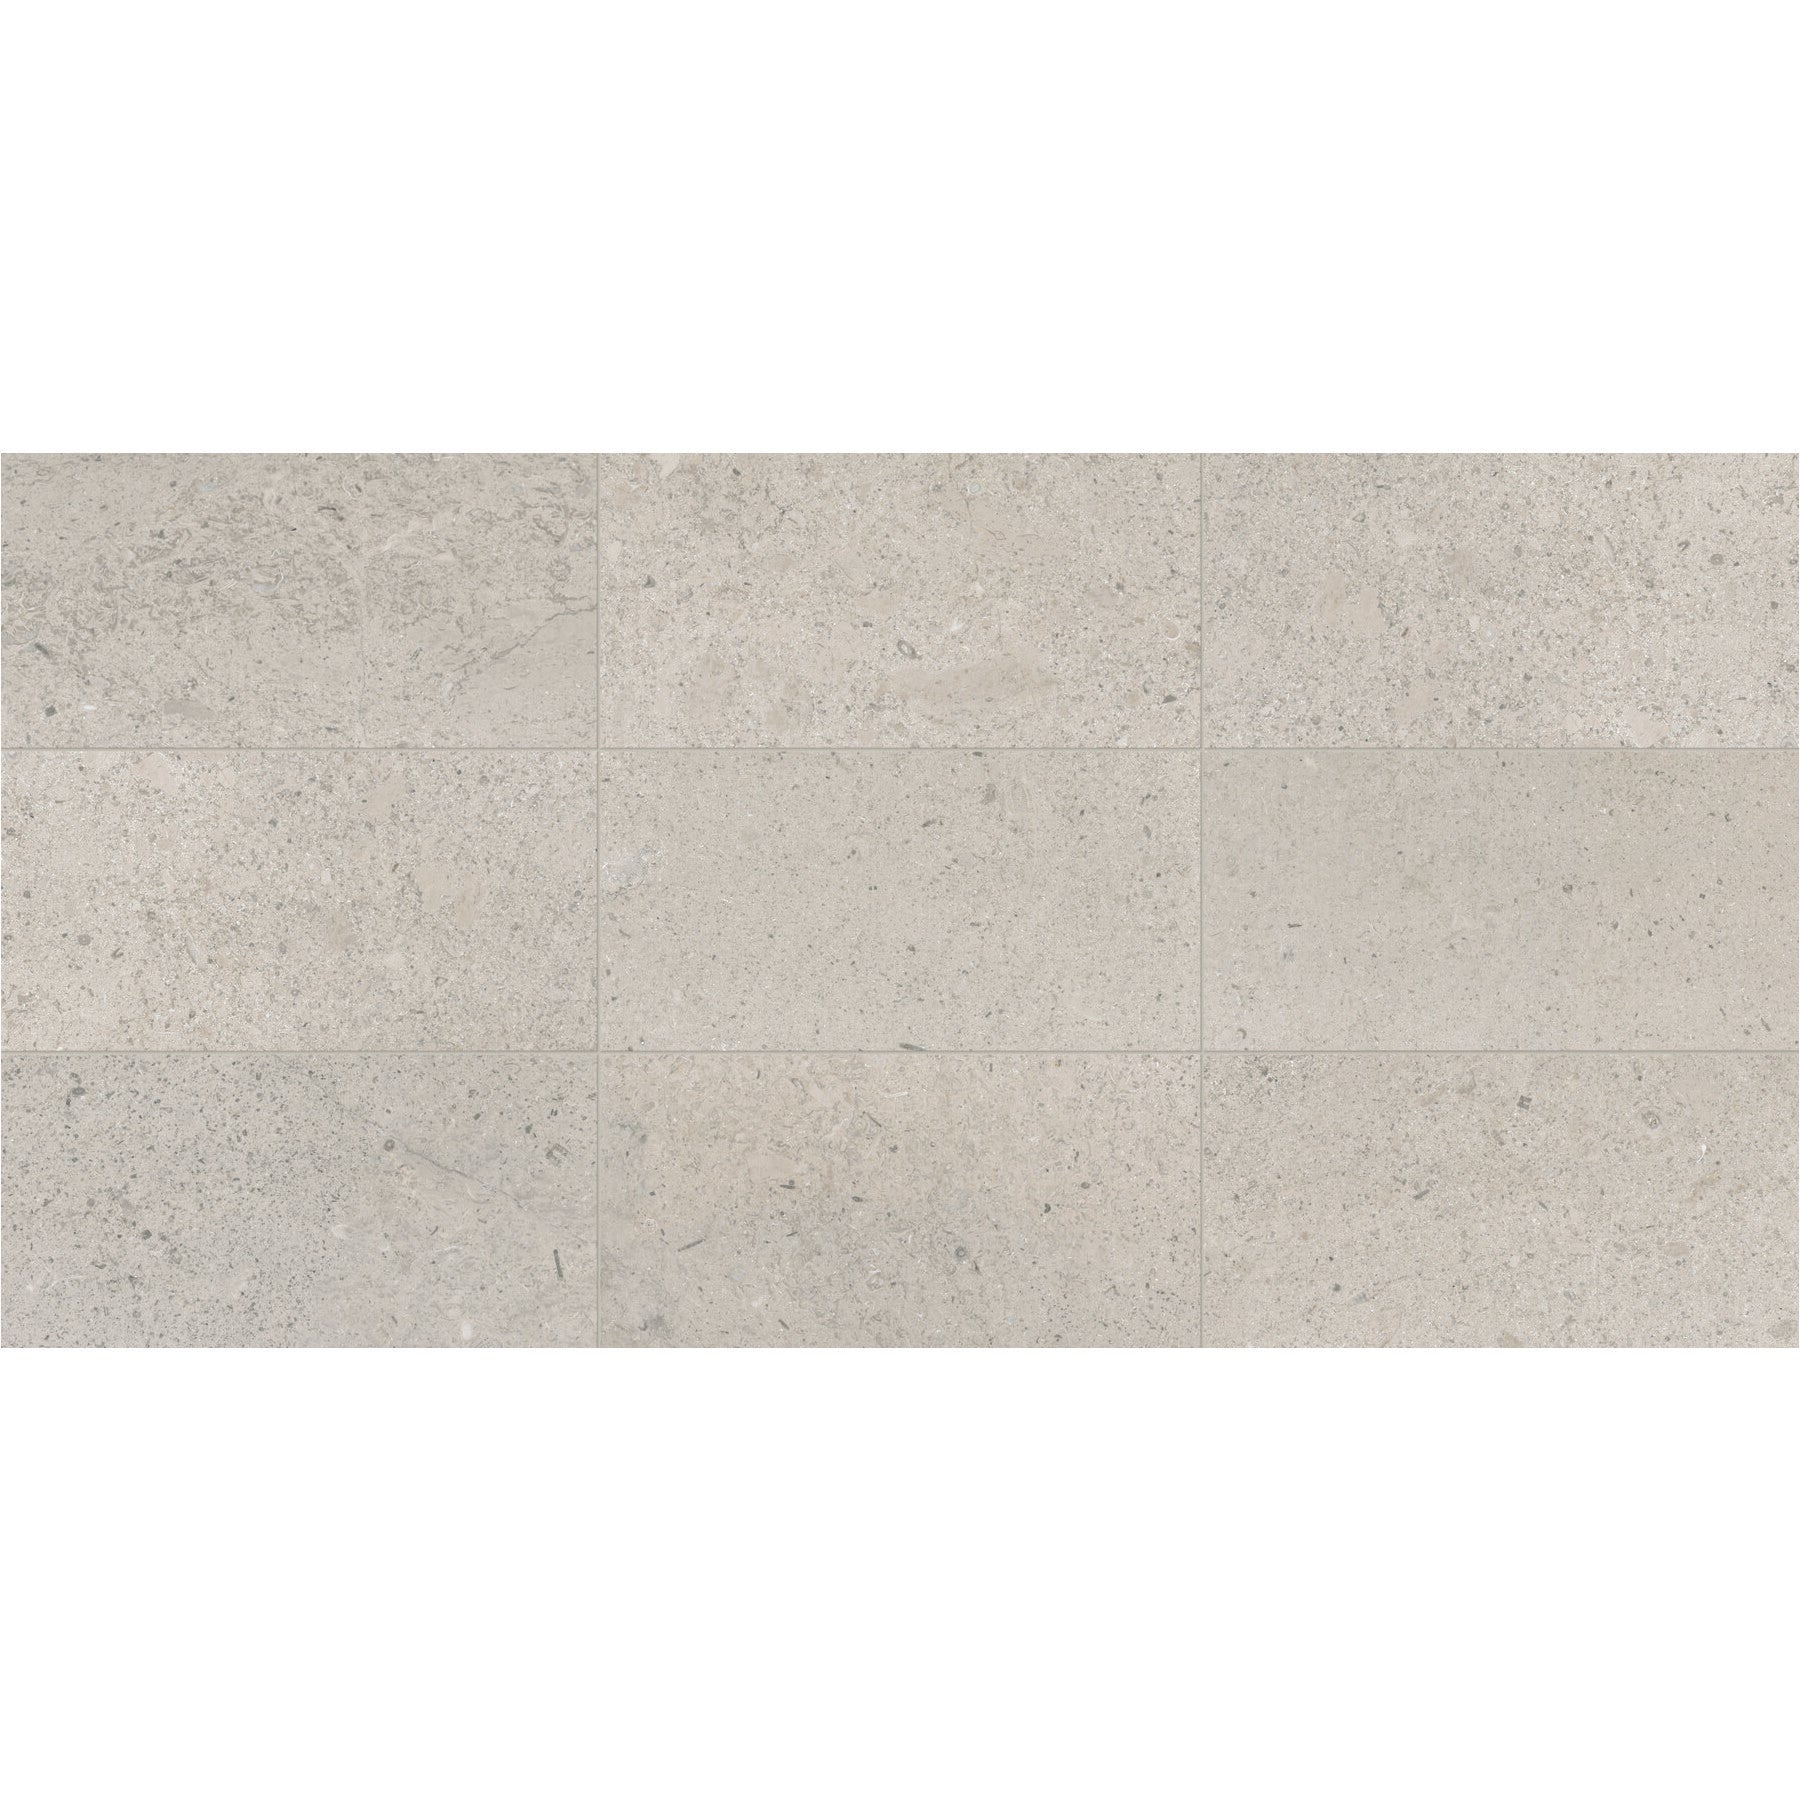 Daltile - Center City - 4 in. x 12 in. Natural Stone - Delancey Grey Polished